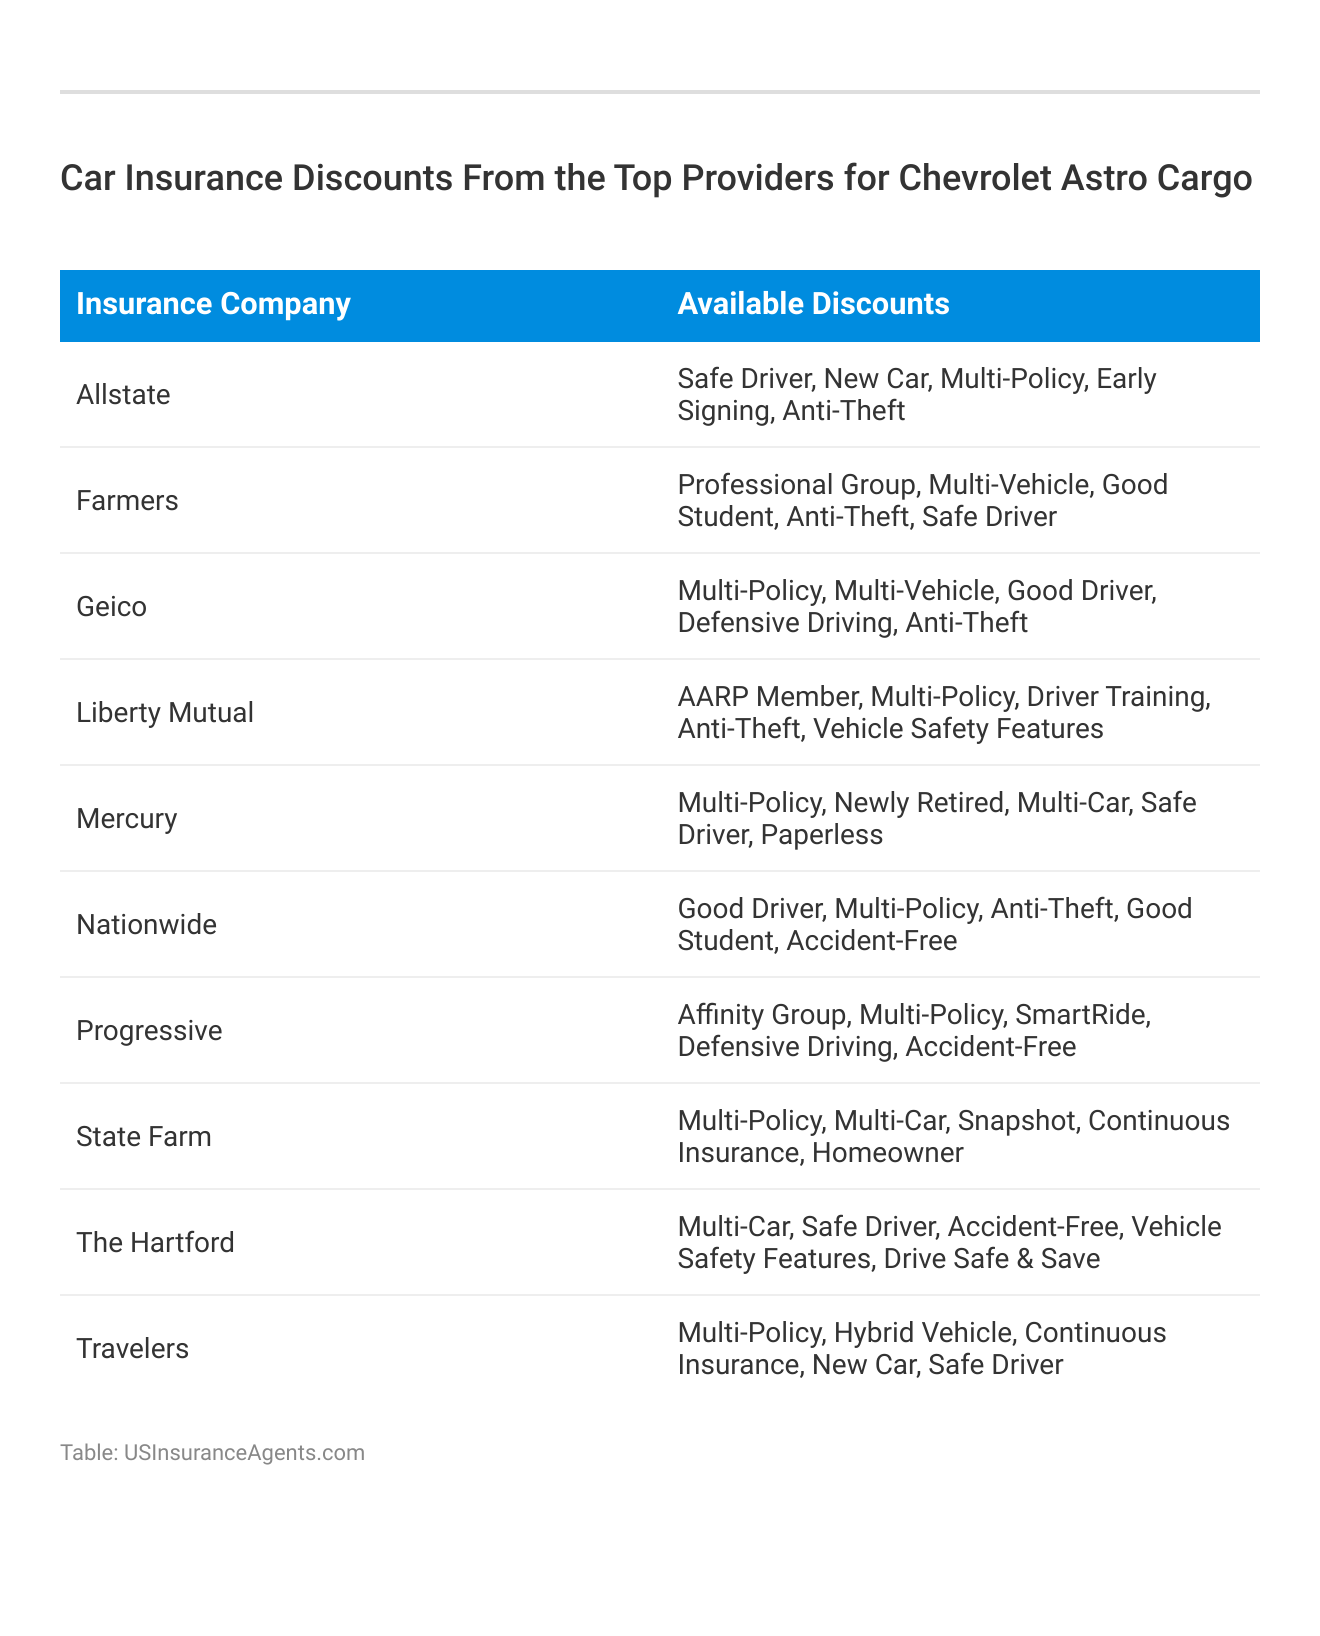 <h3>Car Insurance Discounts From the Top Providers for Chevrolet Astro Cargo</h3>